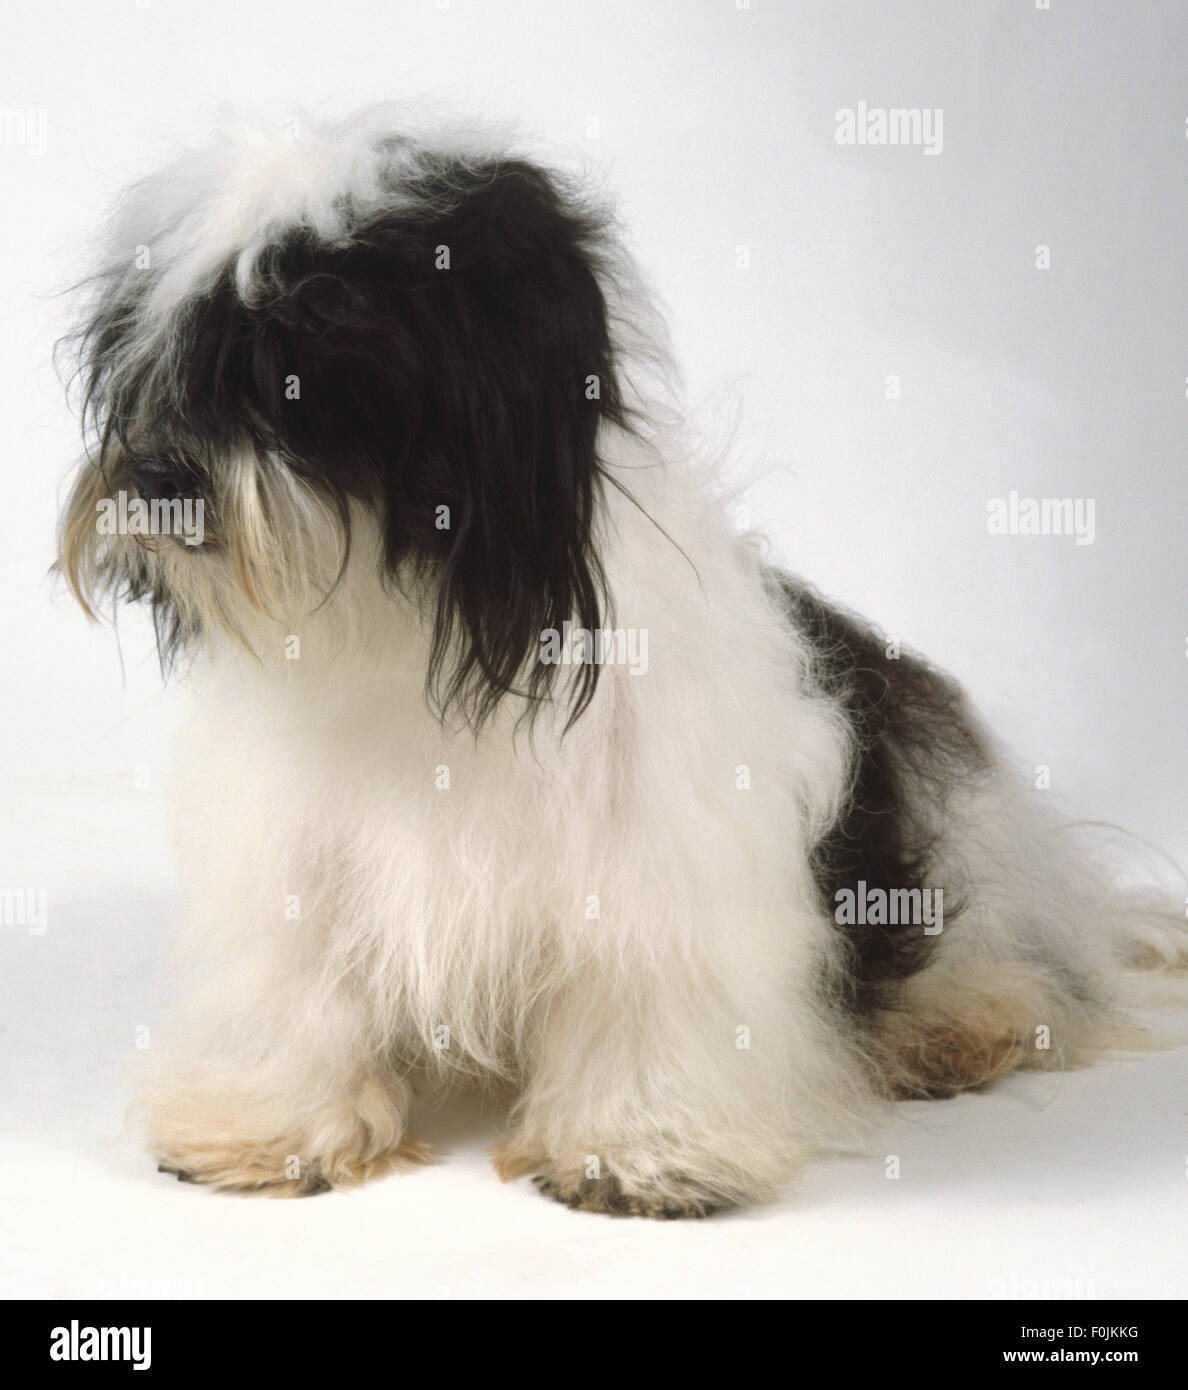 A black and white Kyi Leo dog with a long silky coat draping from its head and body. Stock Photo